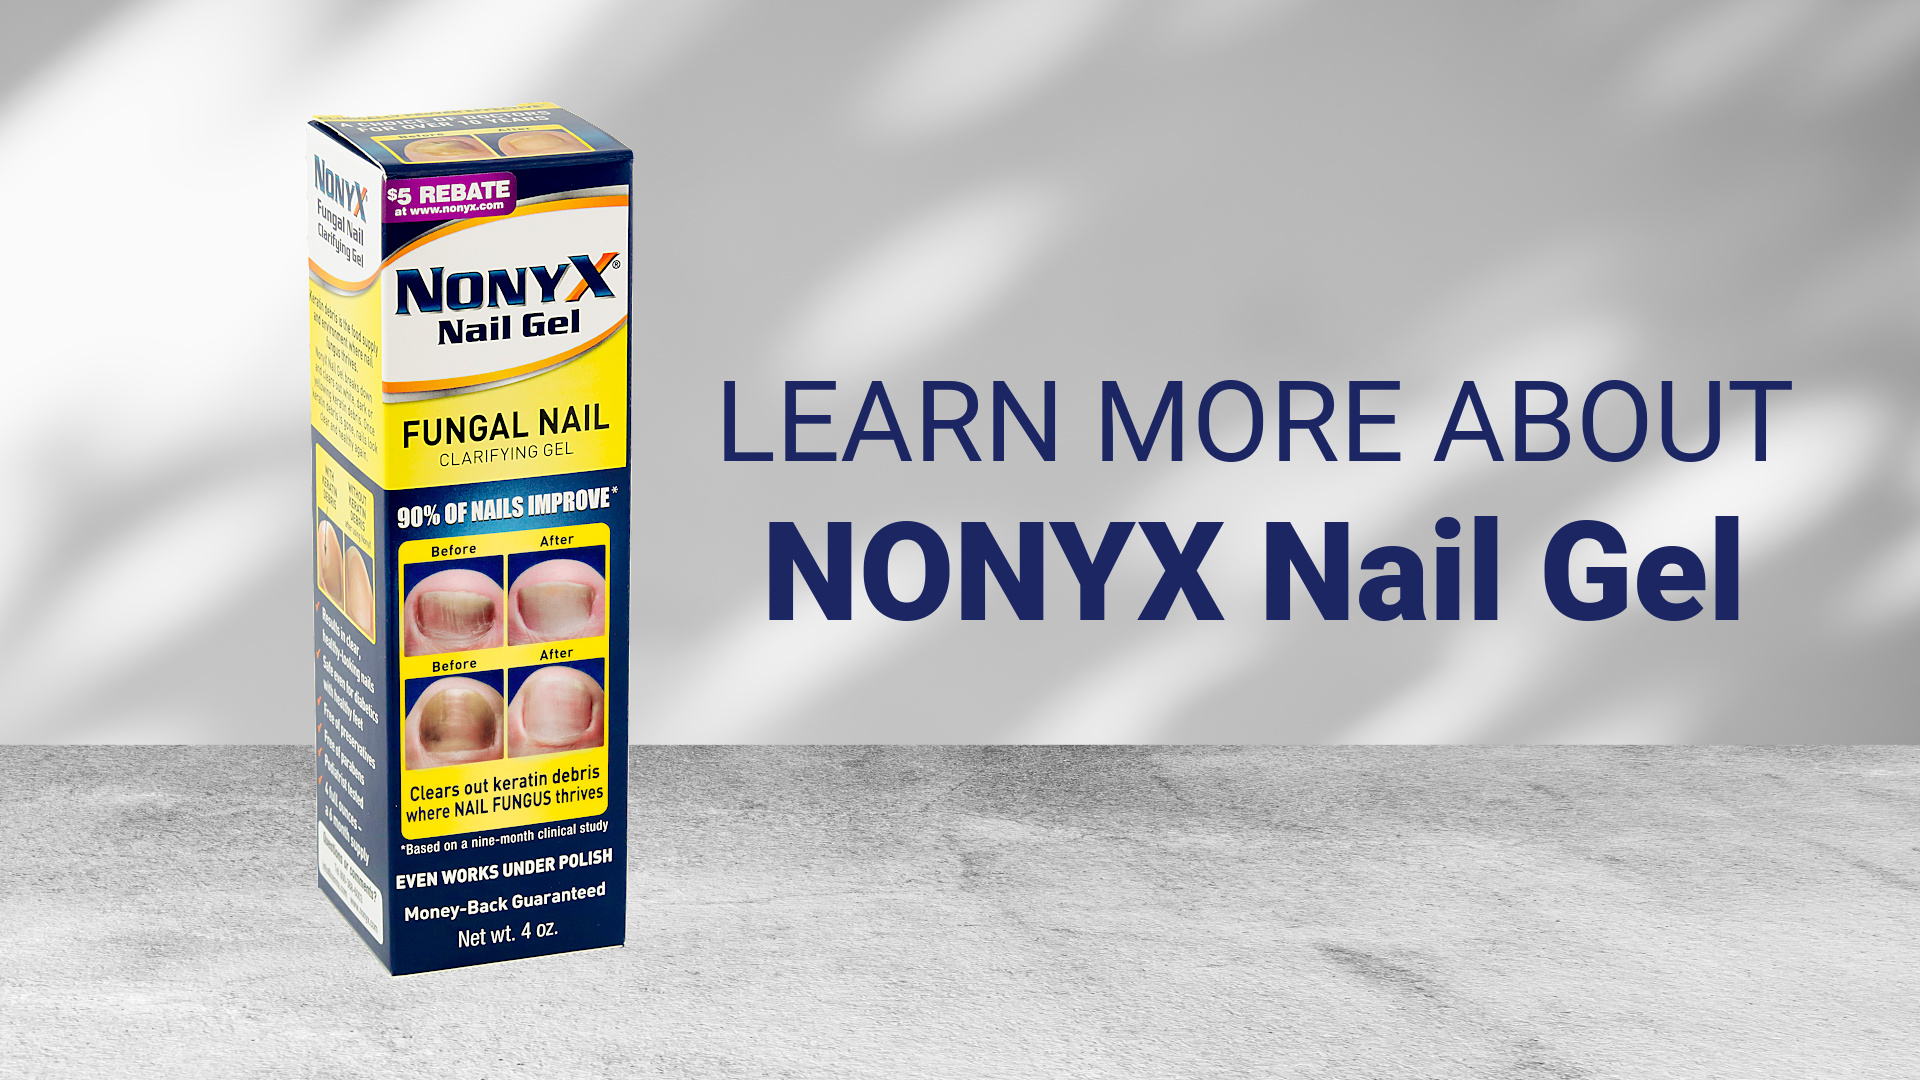 nonyx-fungal-nail-clarifying-gel-clears-out-keratin-debris-where-nail